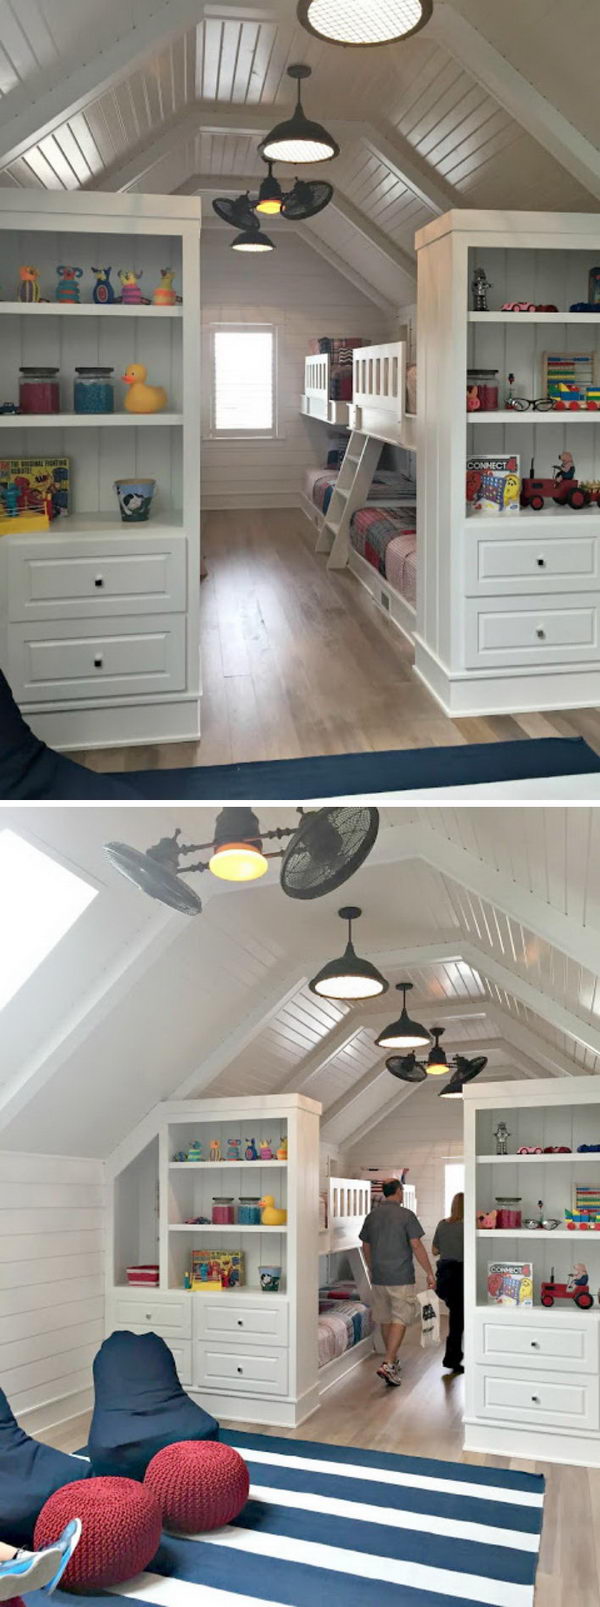 Add Bookcases at The End of The Bunk Beds in The Attic. 